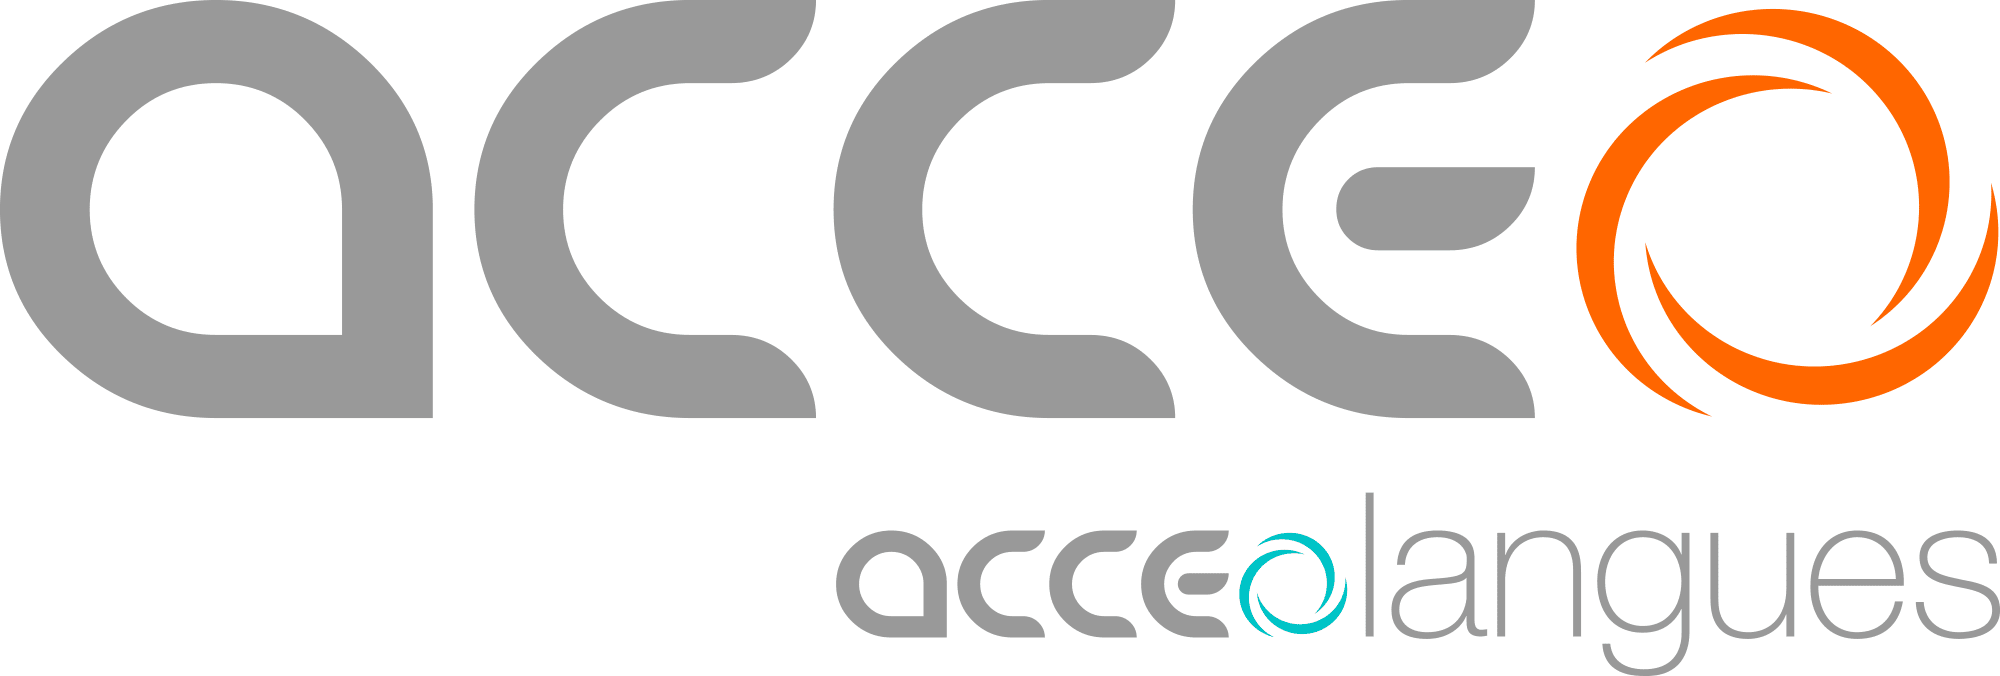 Acceo